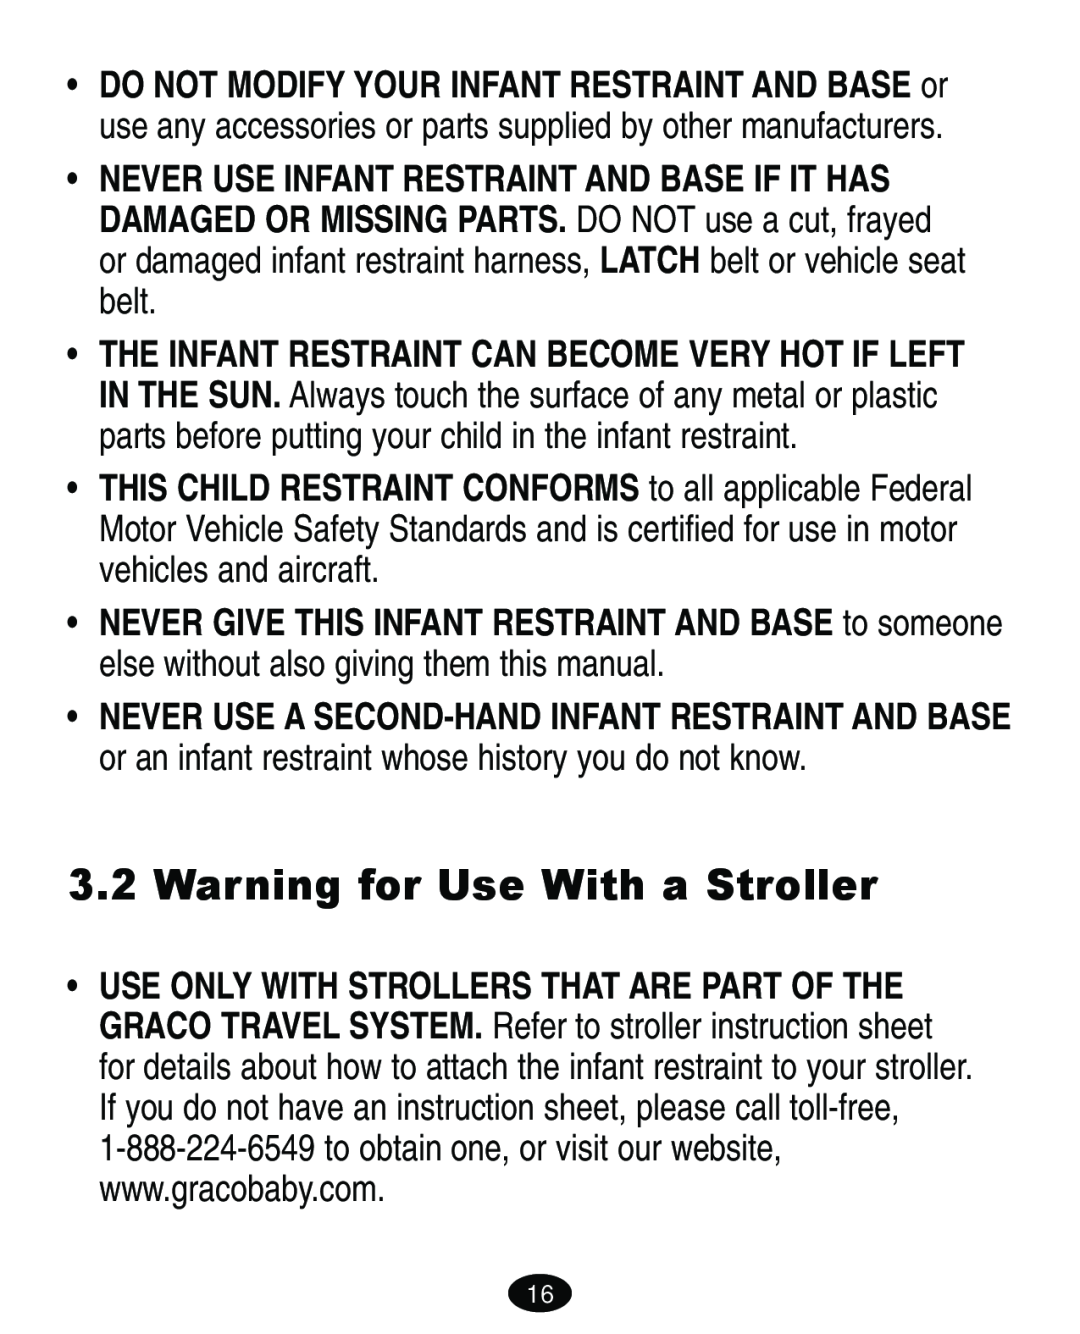 Graco 4460402 manual Warning for Use With a Stroller 